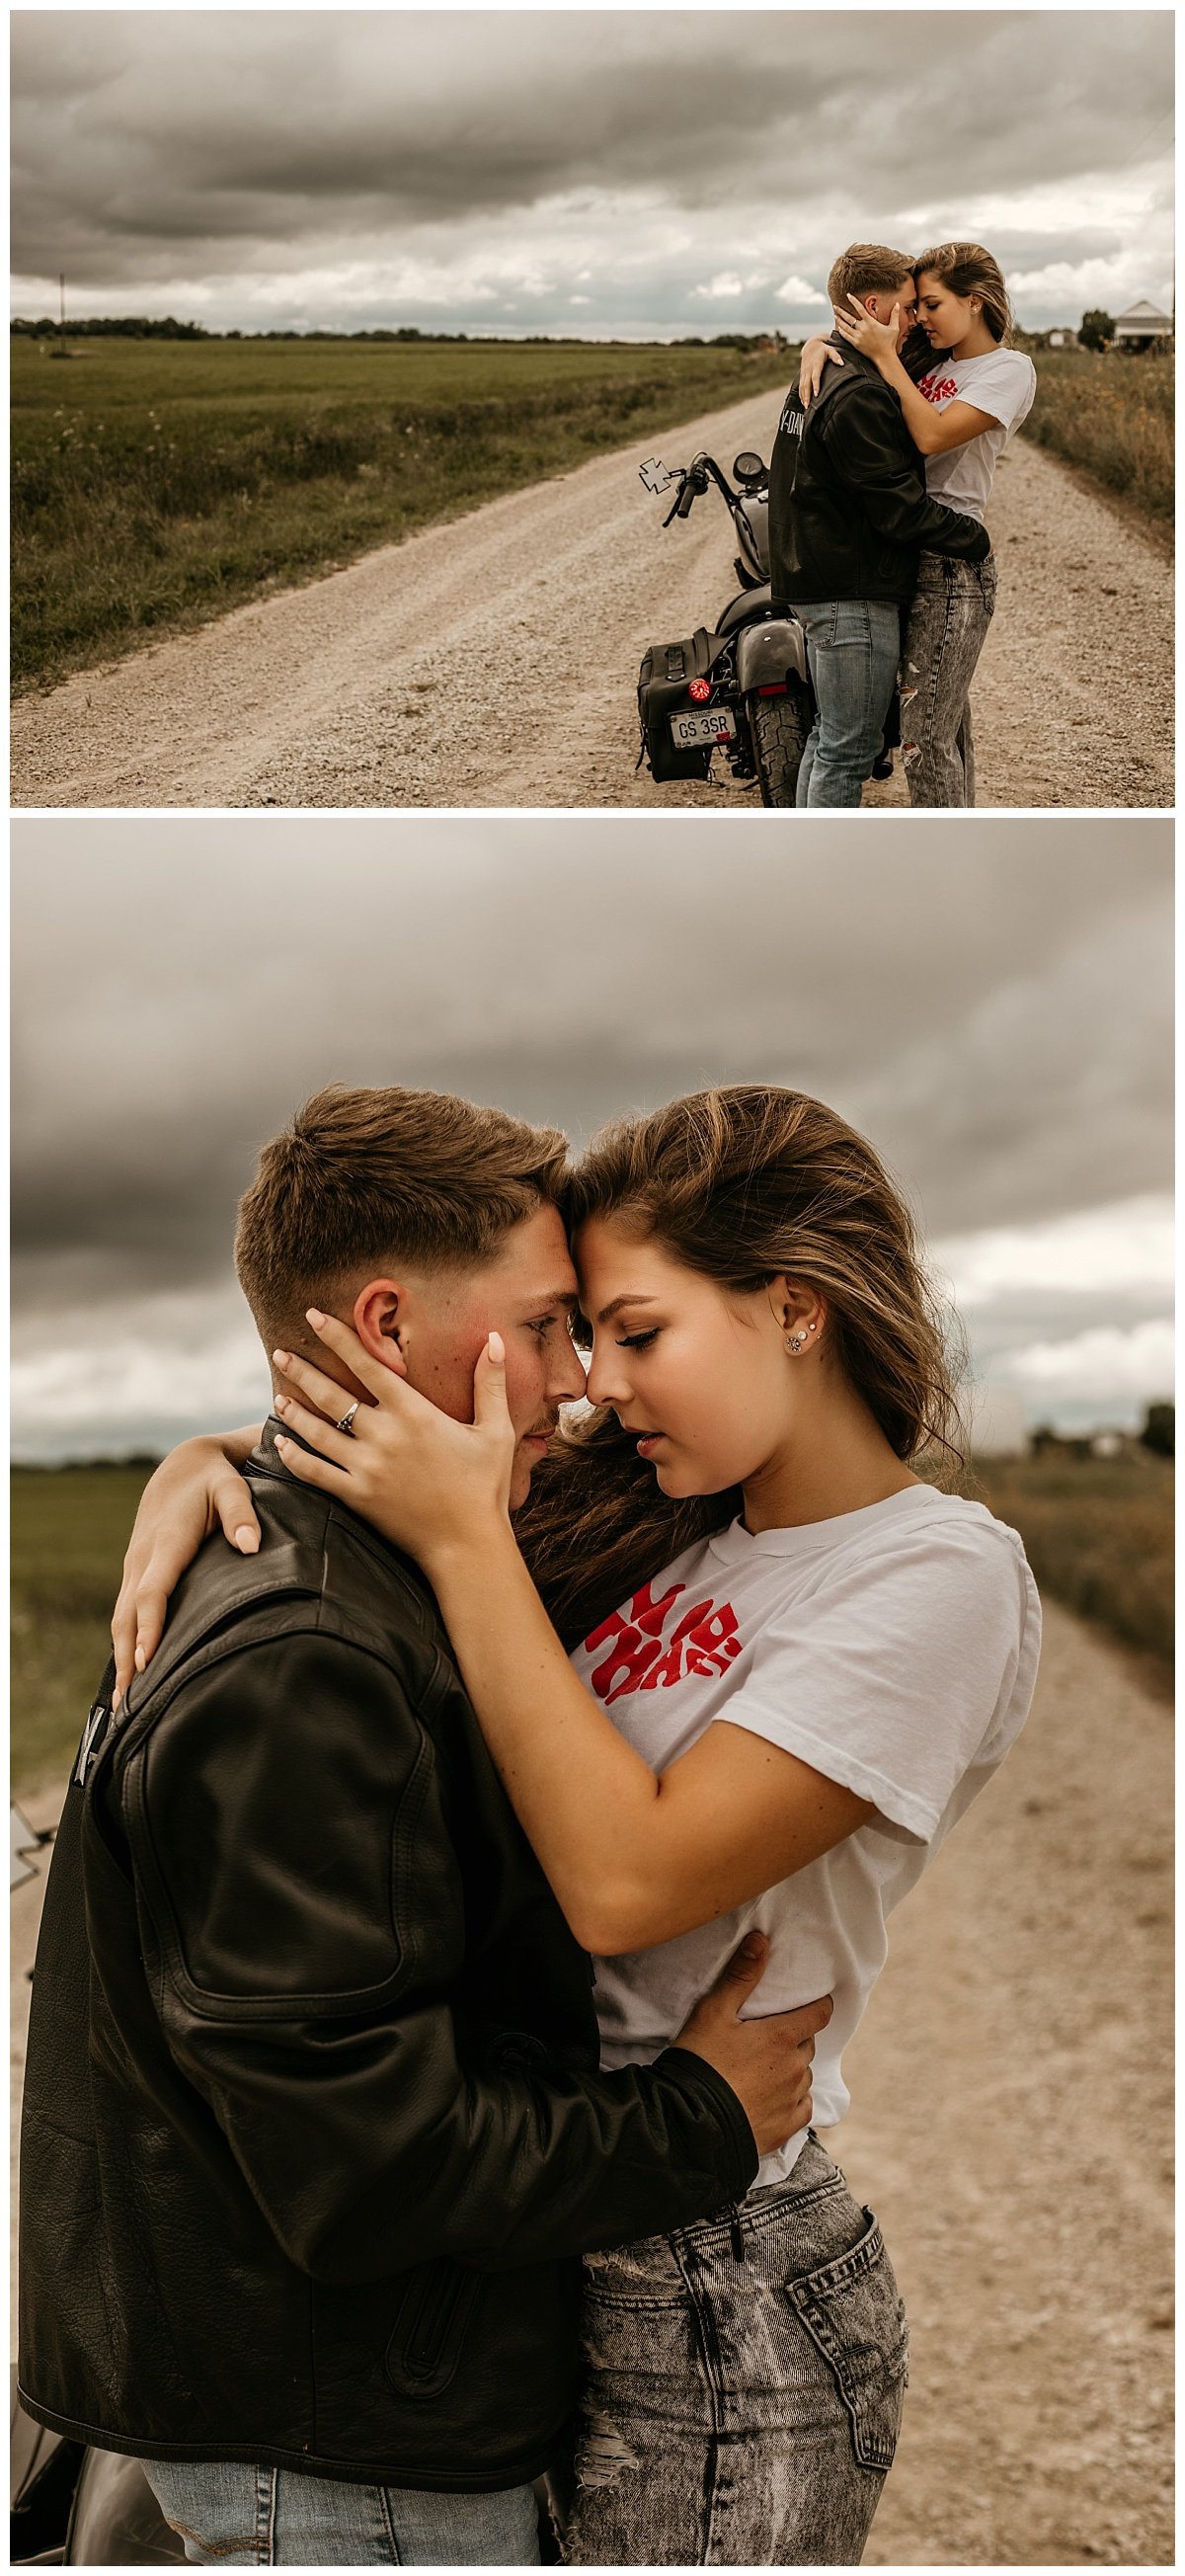 motorcycle+session+_+adventure+session+_+engagement+session+_+motorcycle+photos+_+lana+del+rey+_+ride+or+die+_+adventurous+couple+_+kansas+city+photographer+_+kansas+city+photography (8).jpeg